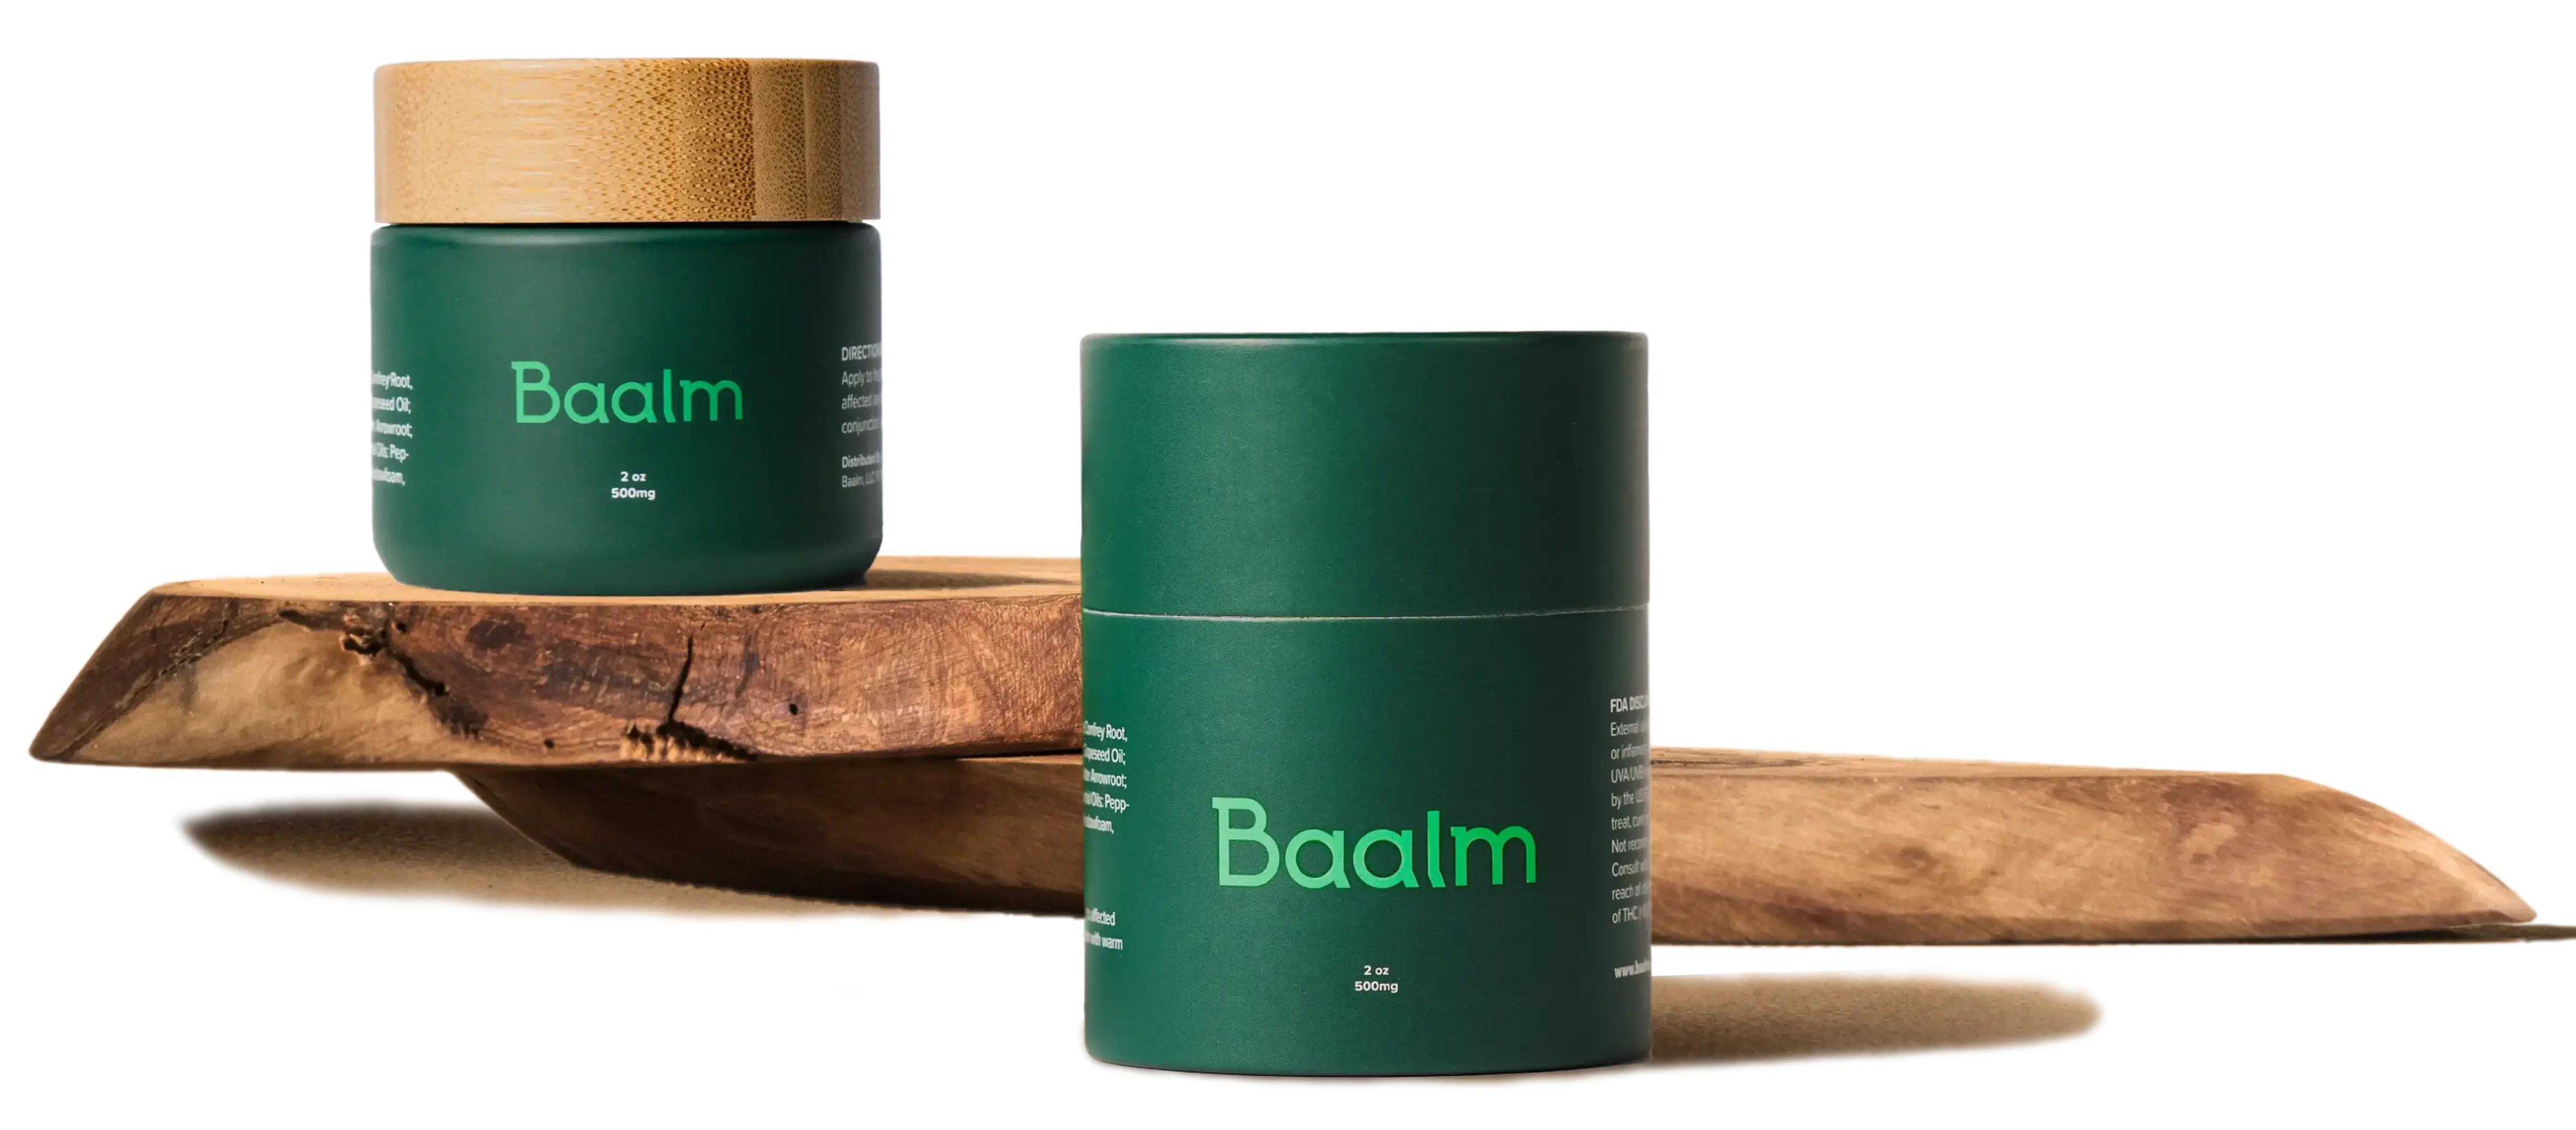 A two-tiered wood pedestal with container of Baalm on the left and Baalm packaging in front to the right.